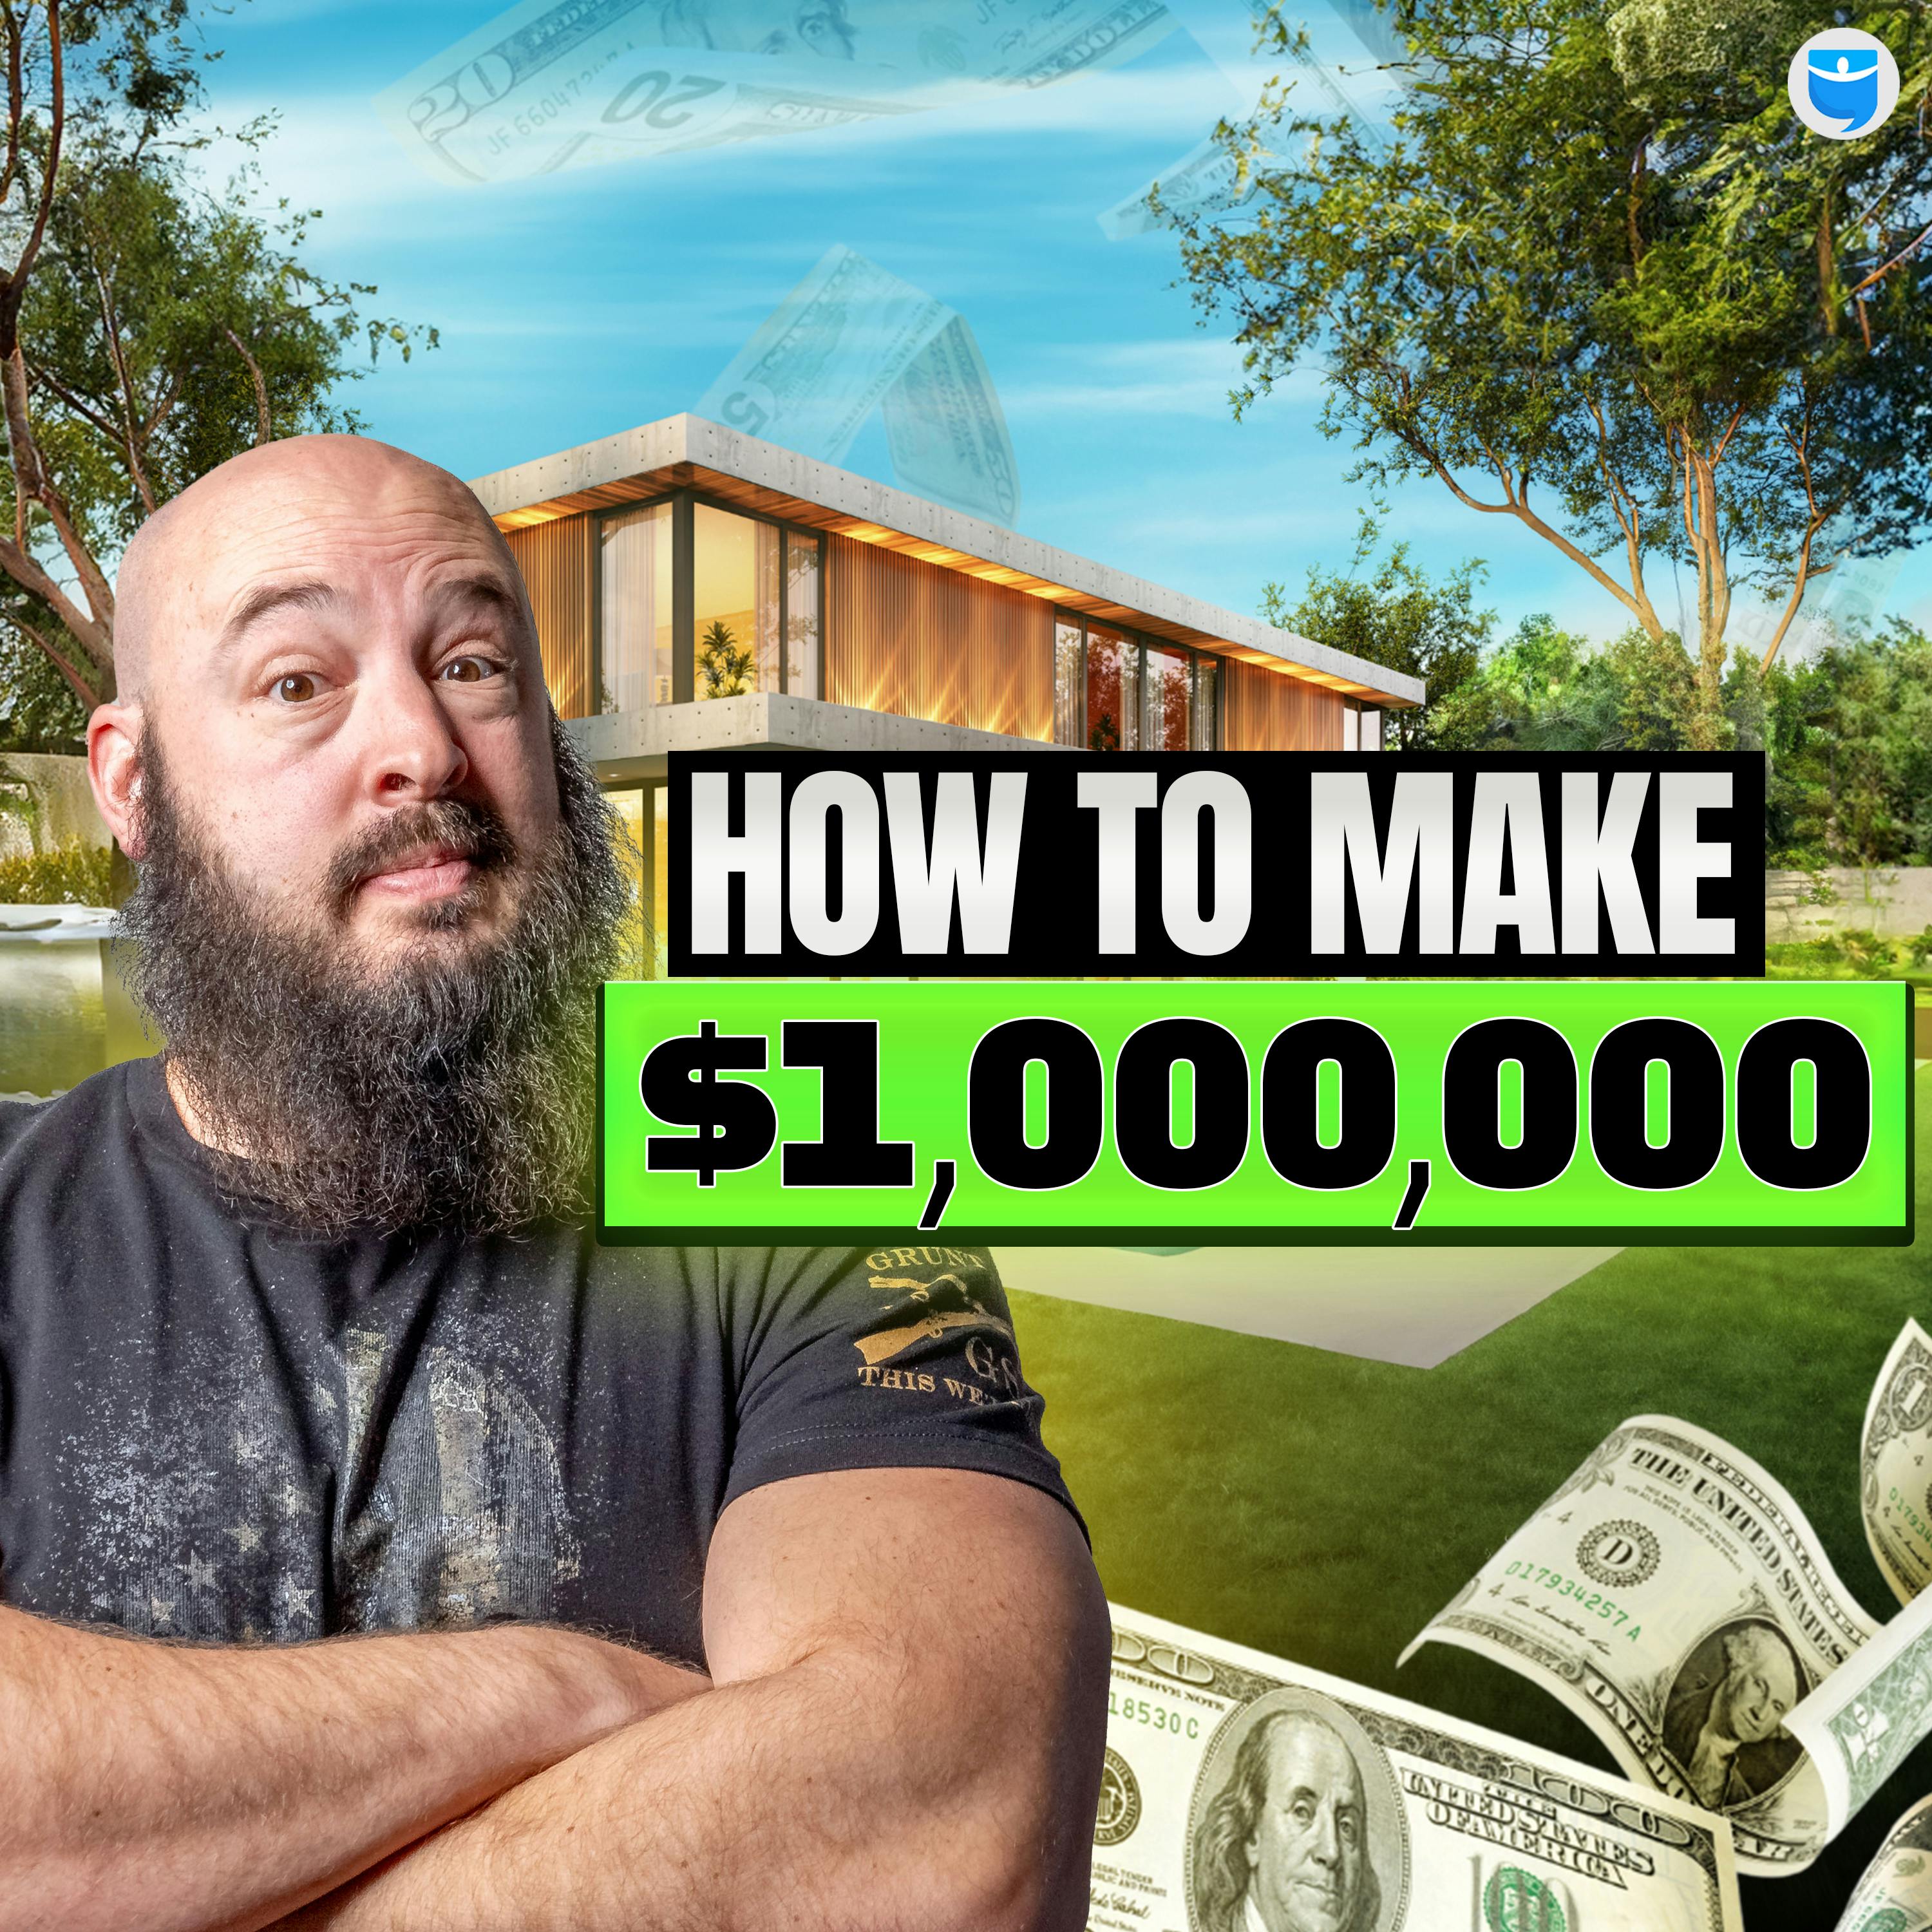 906: How to Become a Millionaire Through Real Estate Investing (Beginners!)